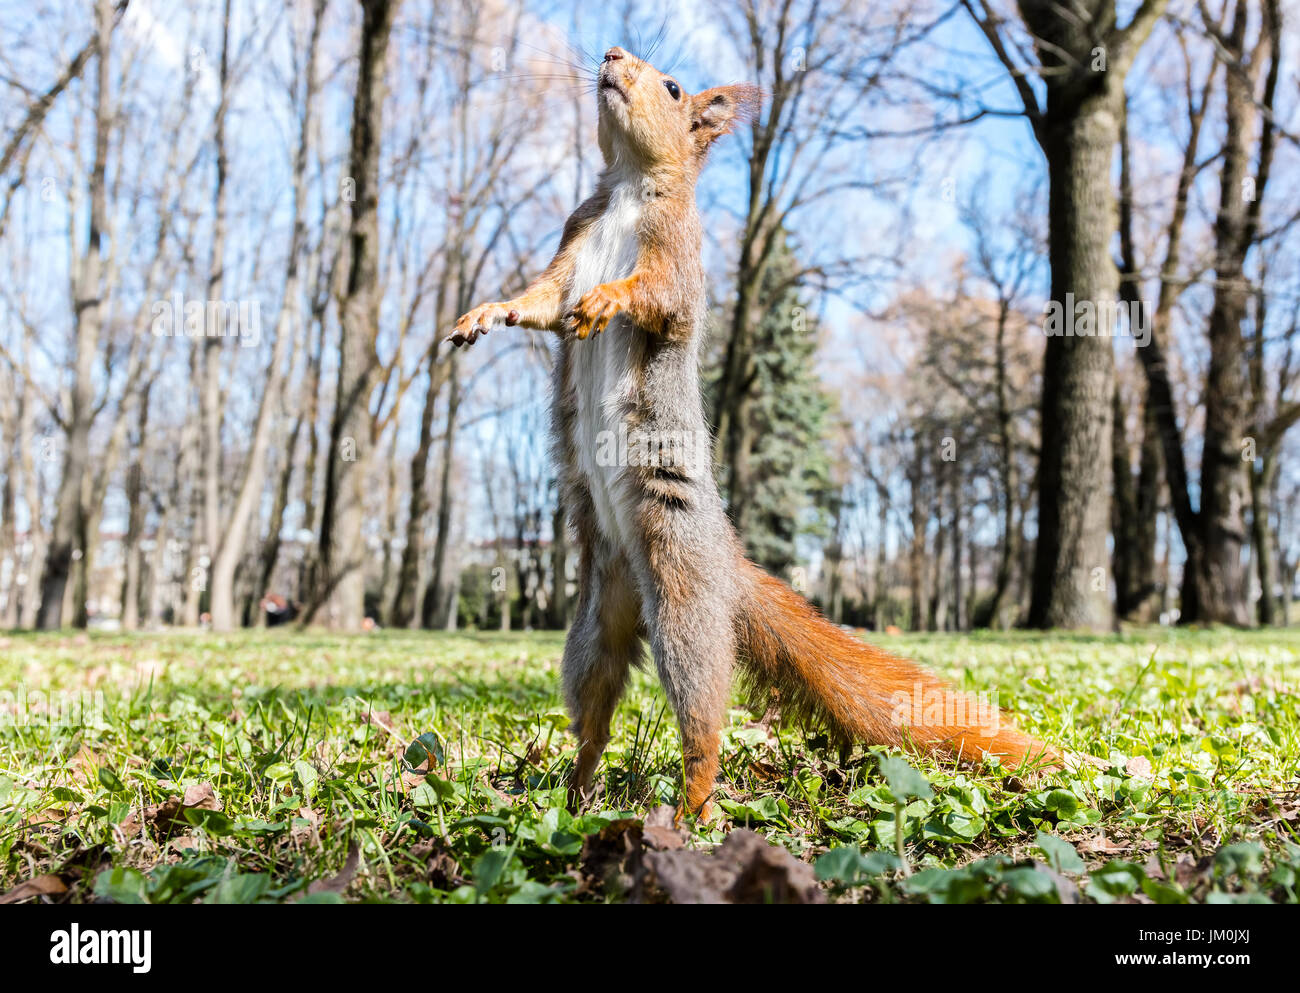 red squirrel standing upright on its hind legs on grass against blurred park background Stock Photo